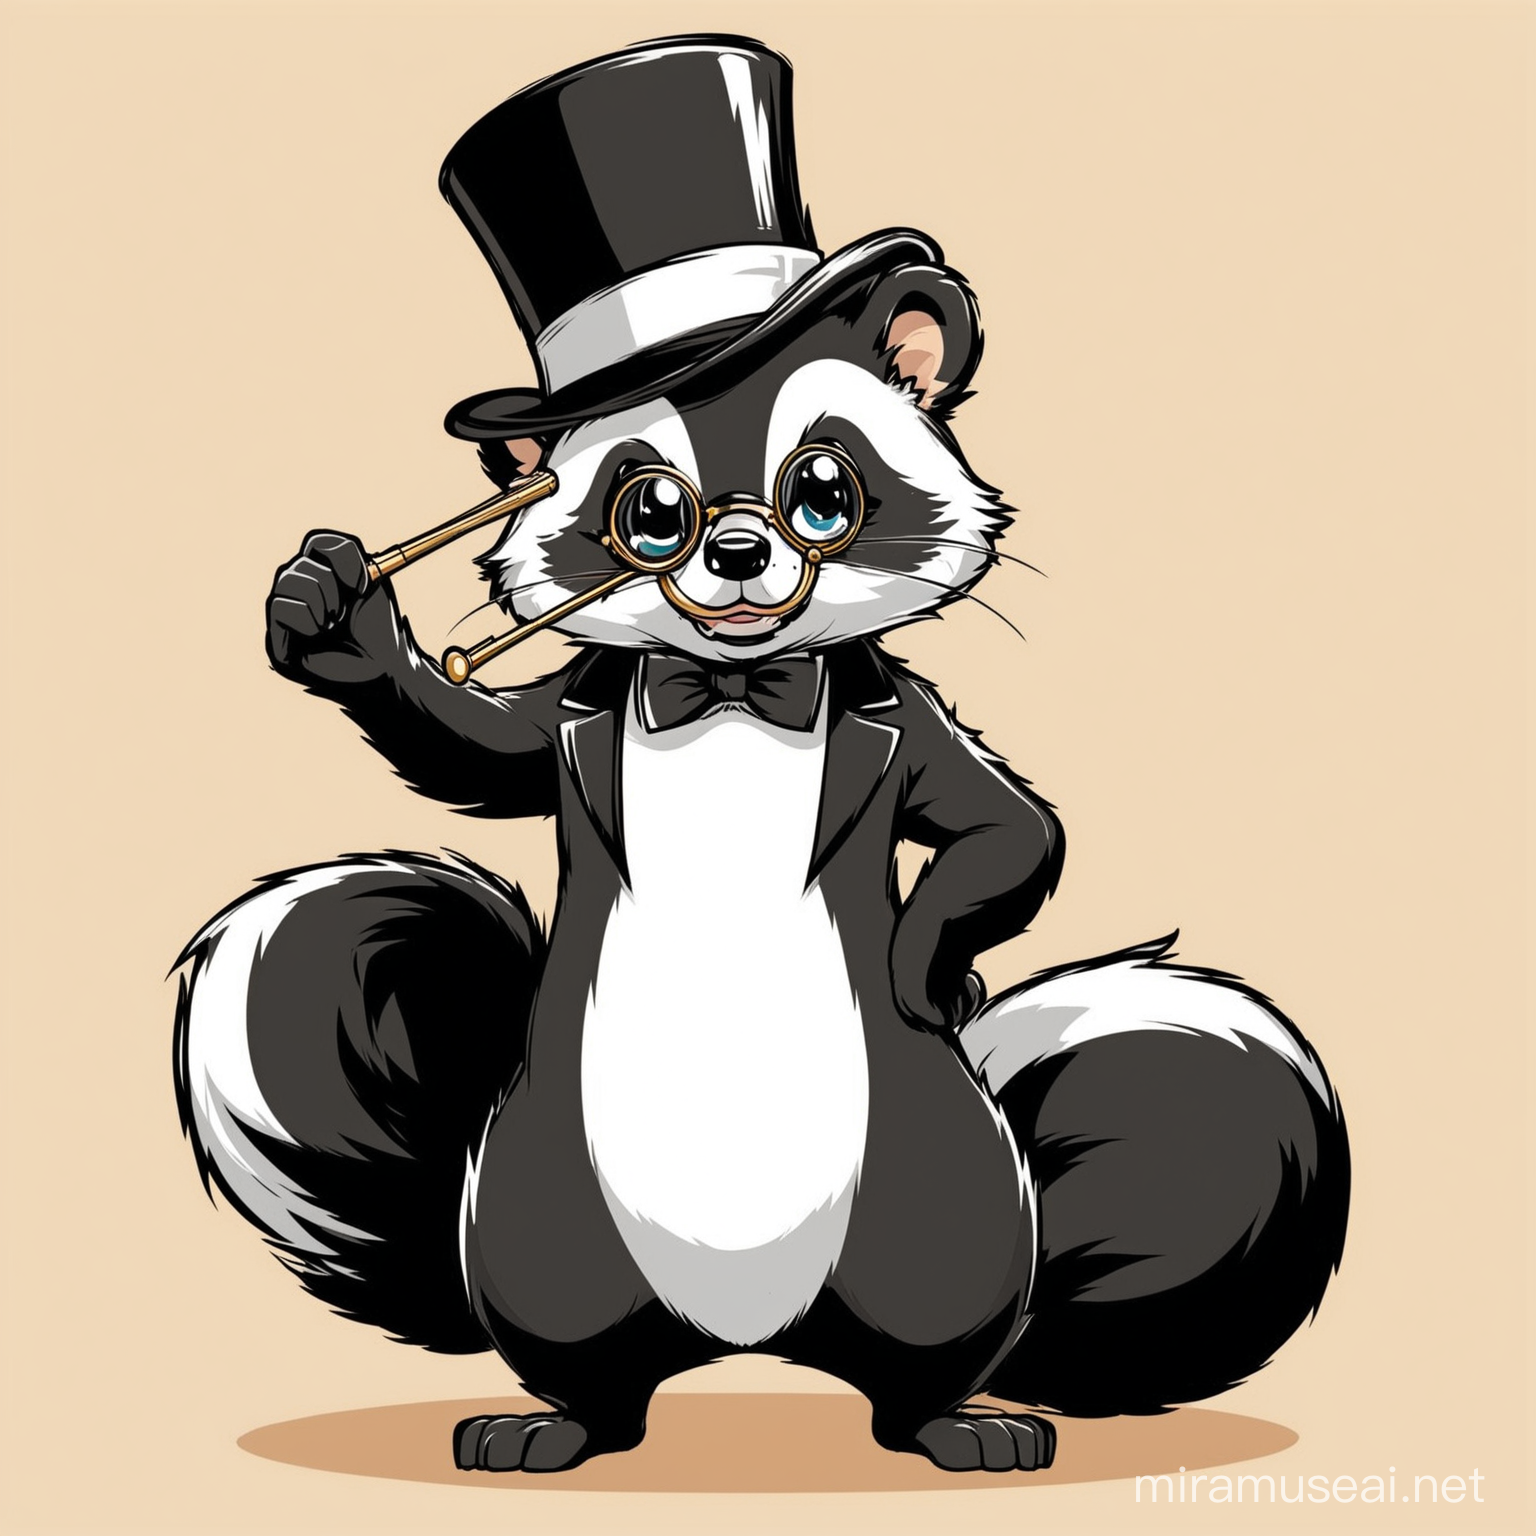 Cartoon skunk with a top hat, wearing a monocle